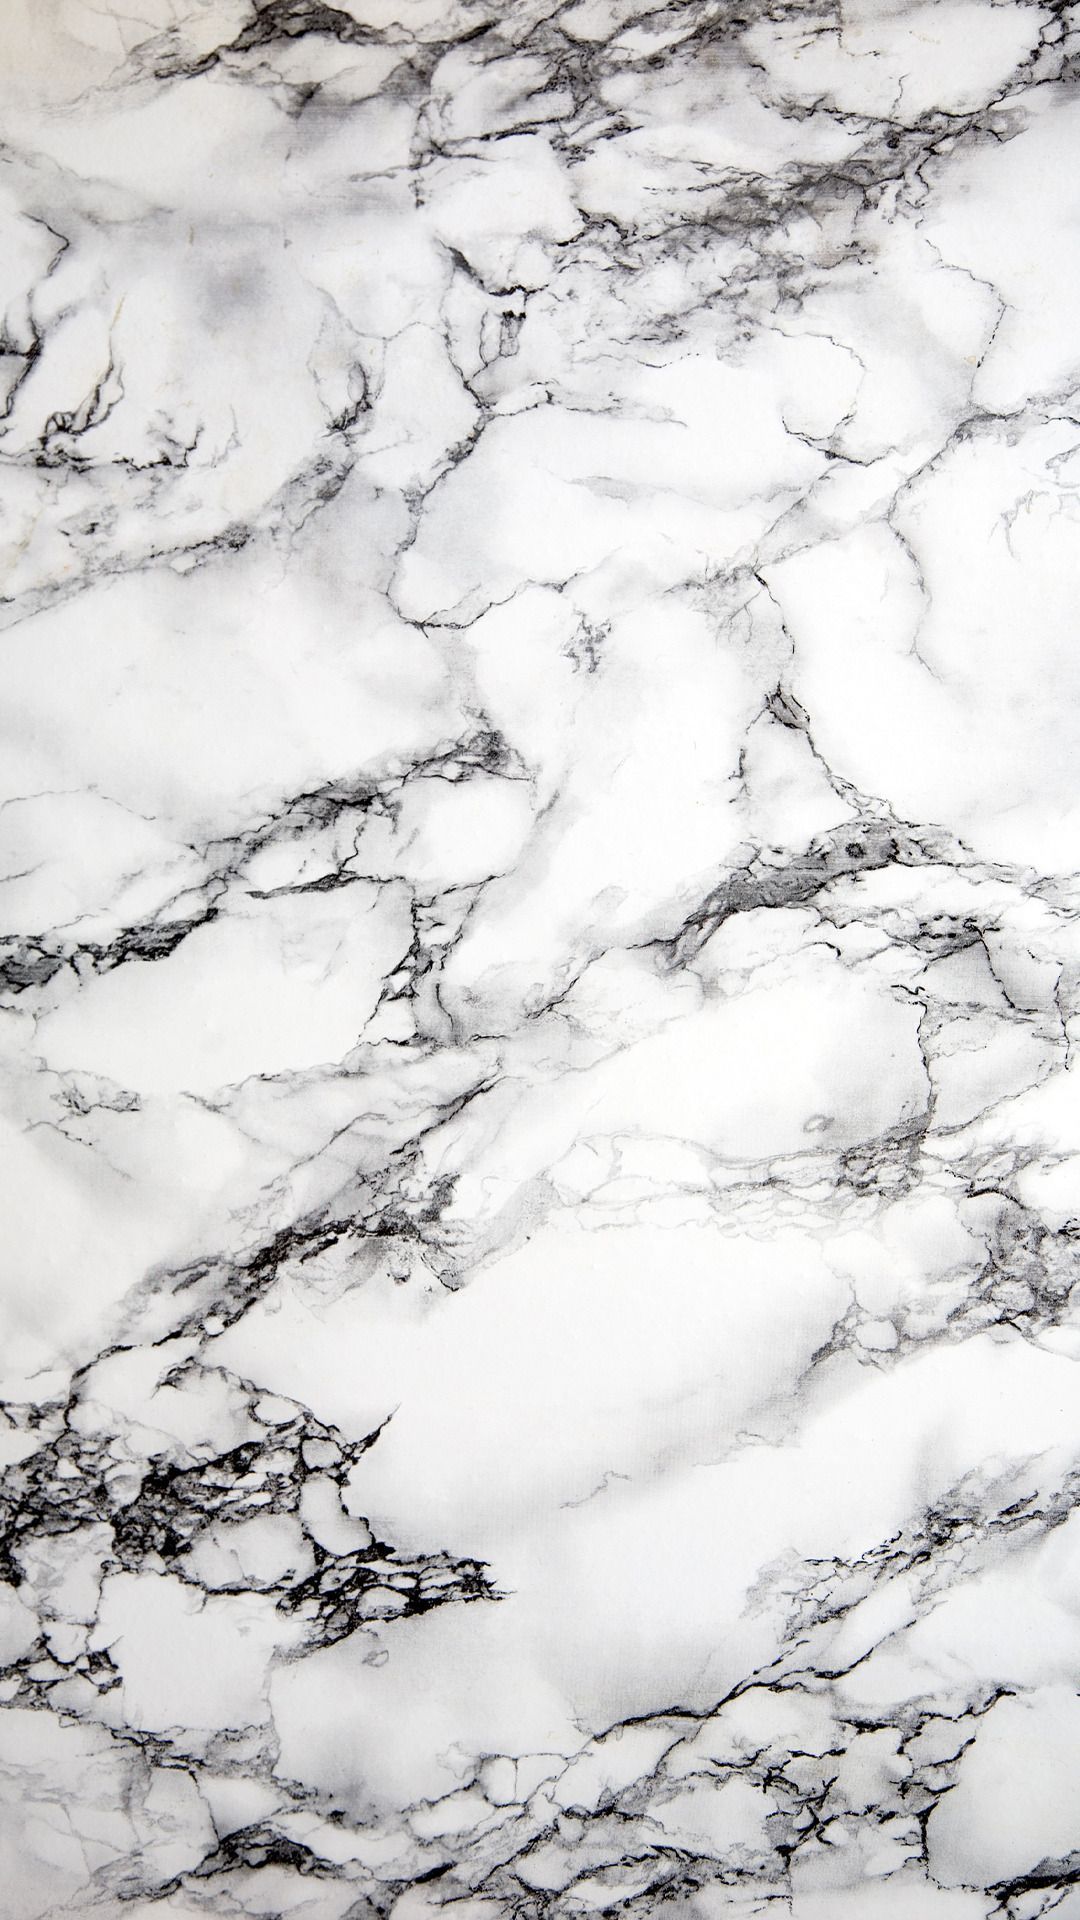 marble. Phone background wallpaper, Marble iphone wallpaper, Tumblr wallpaper